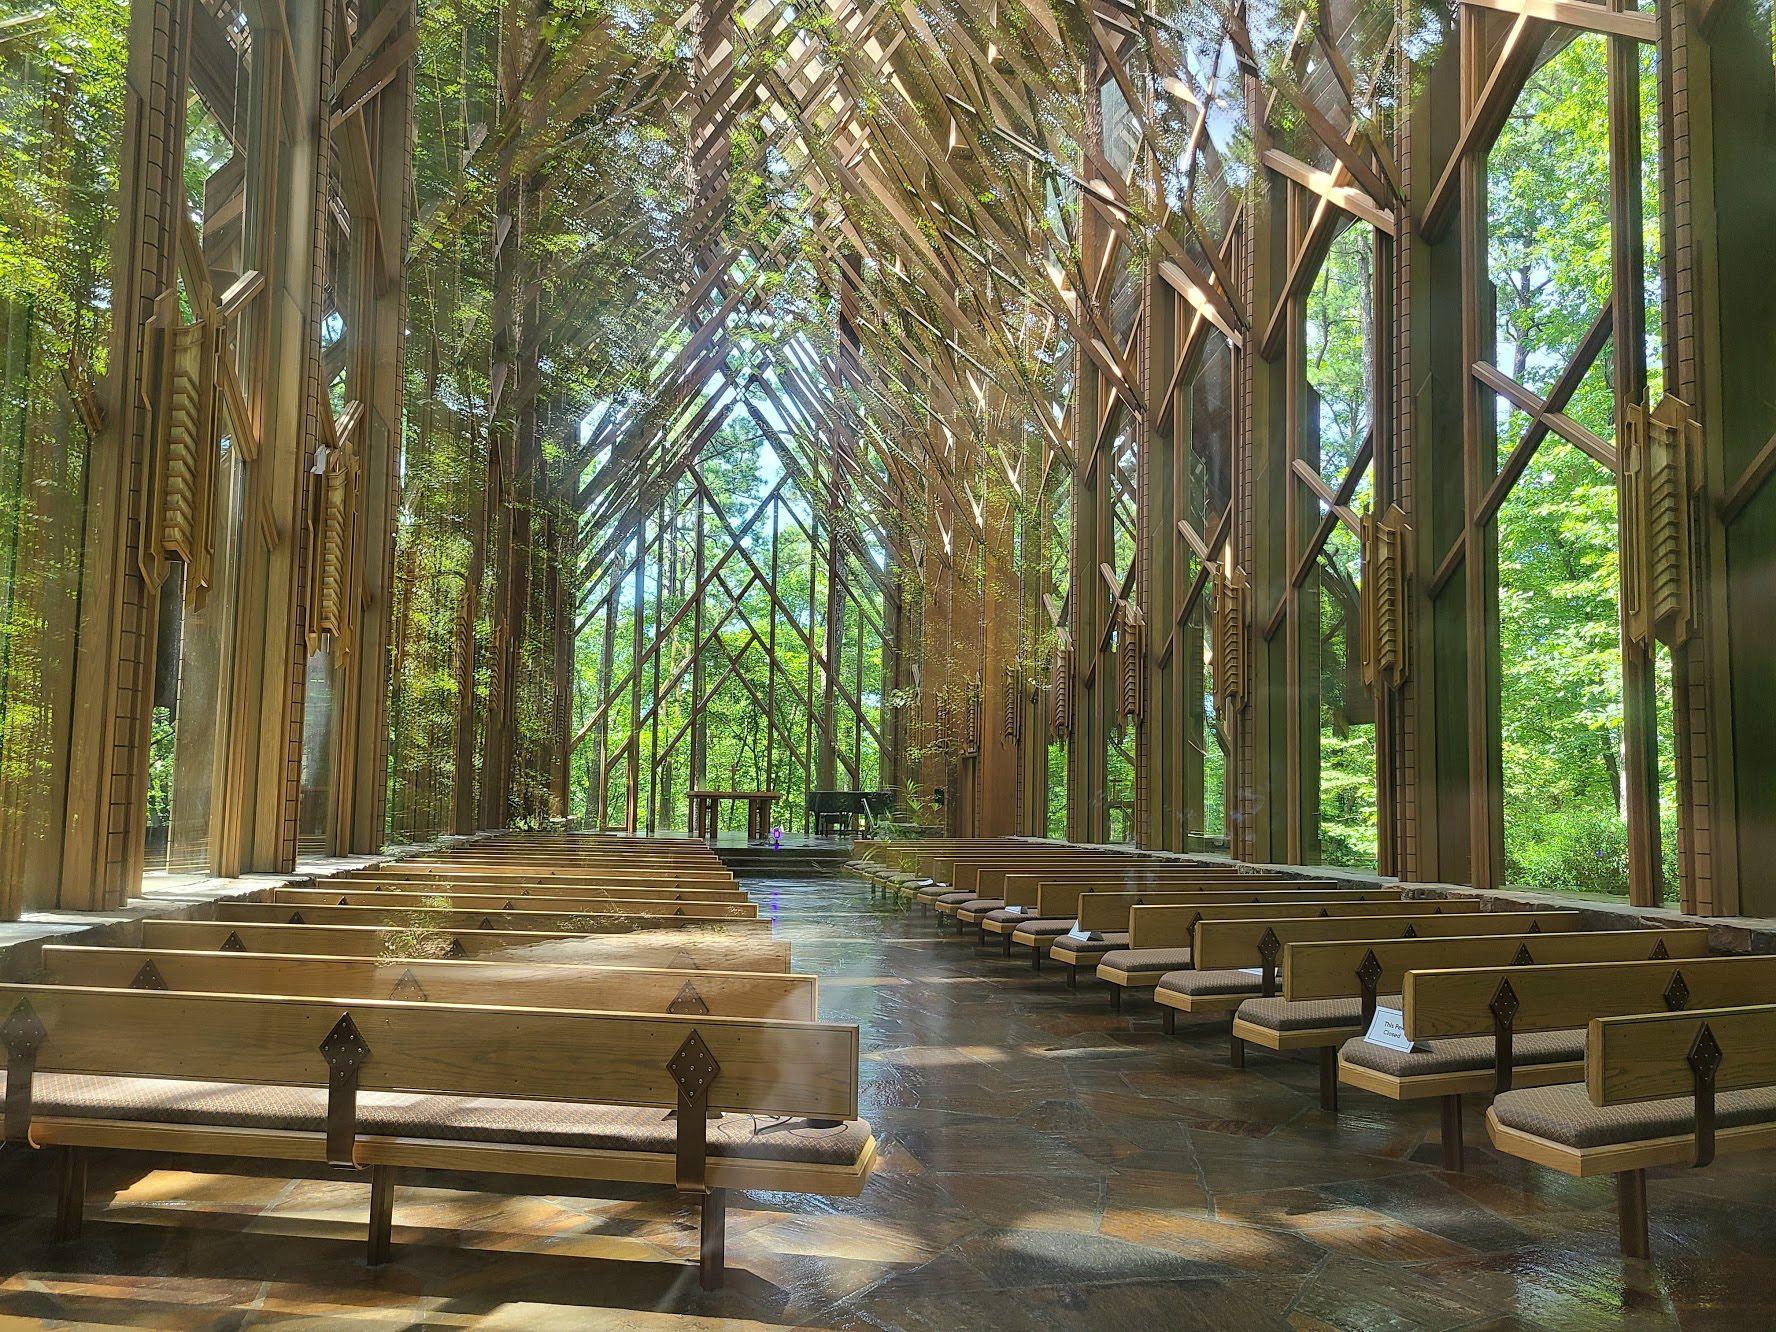 The inside of Anthony Chapel. There are bench seats and you can see the surrounding forest through all of the glass.